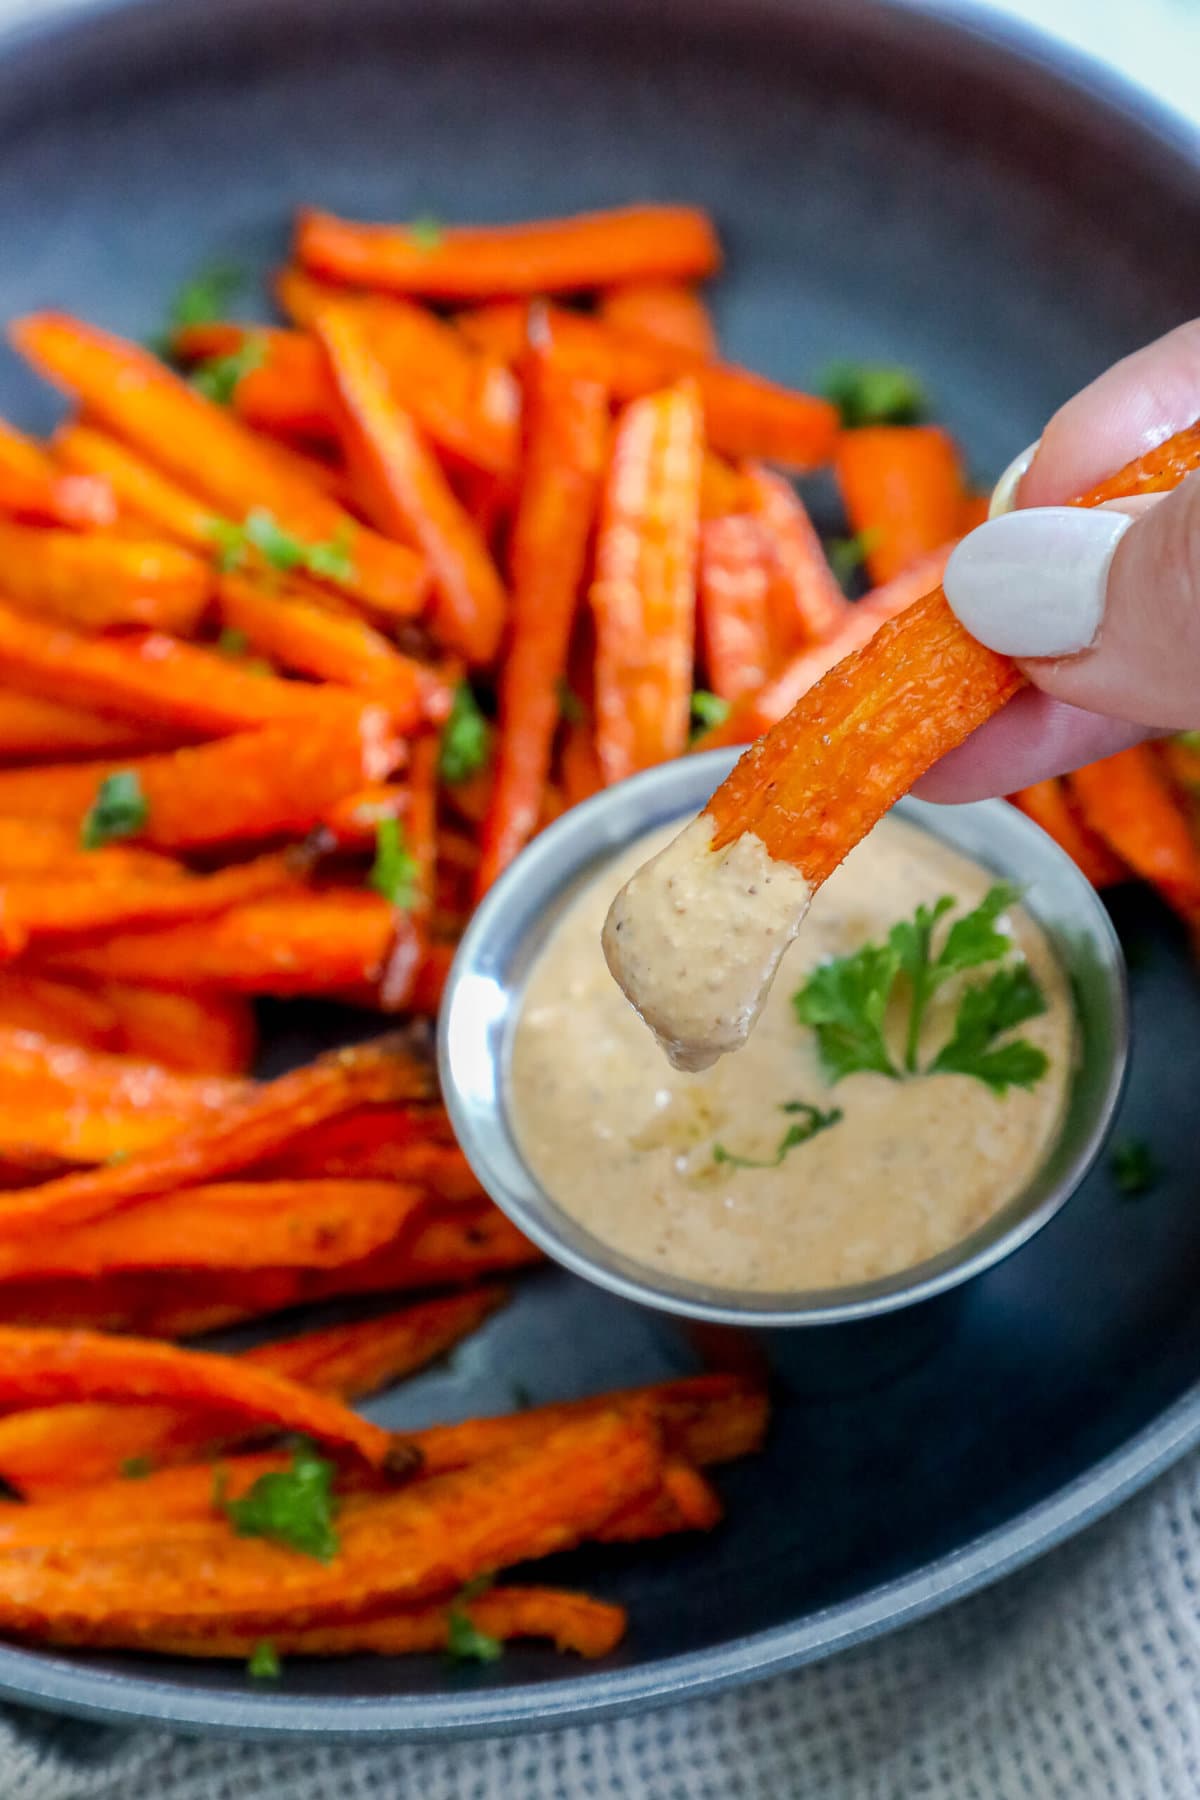 picture of a hand holding a carrot fry dipped in sauce 